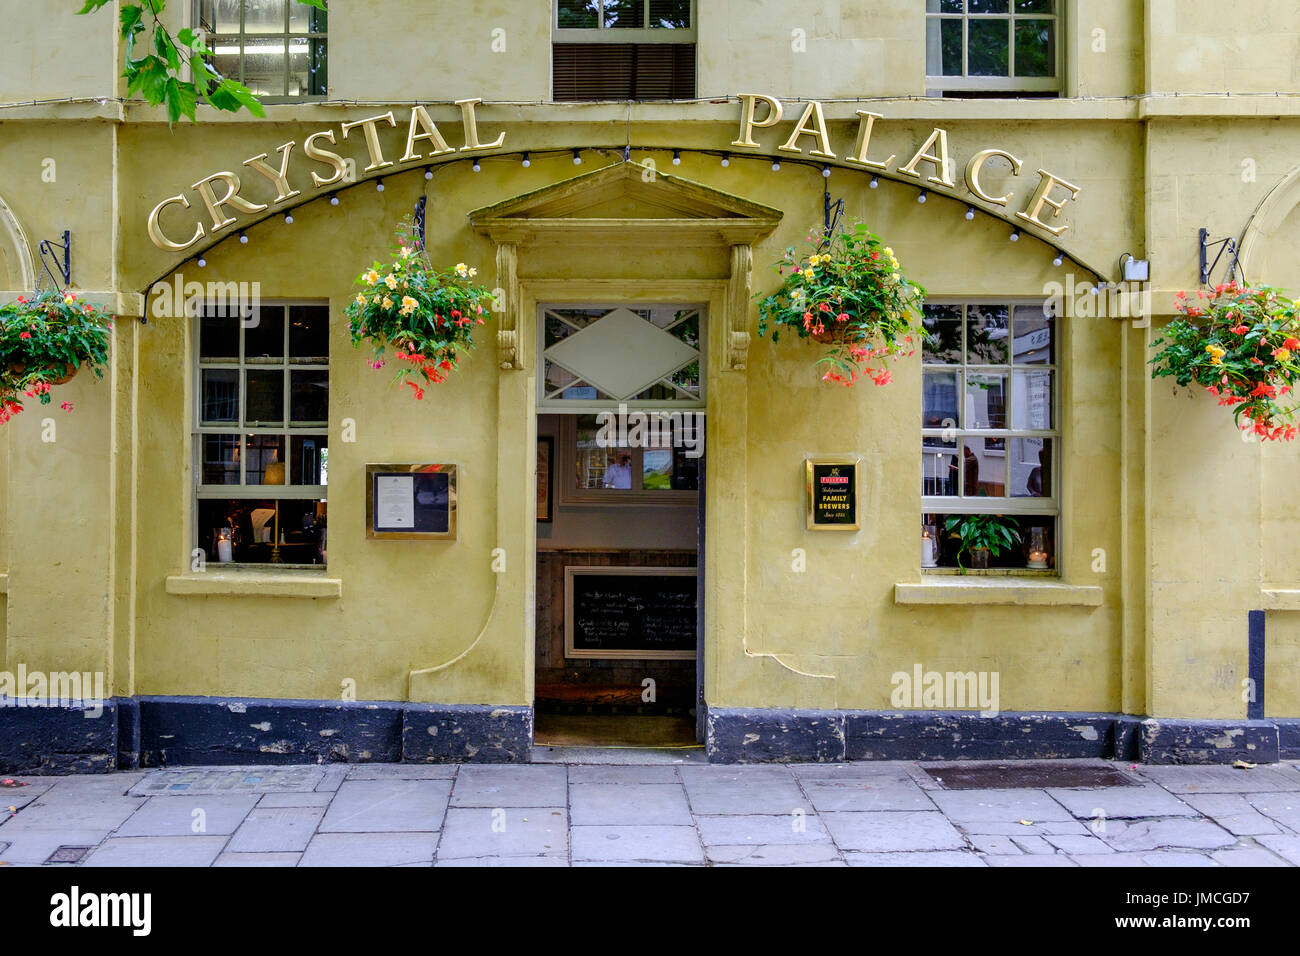 The exterior of The Crystal Palace pub, a traditional english pub / public house is pictured in Bath,Somerset,England UK Stock Photo